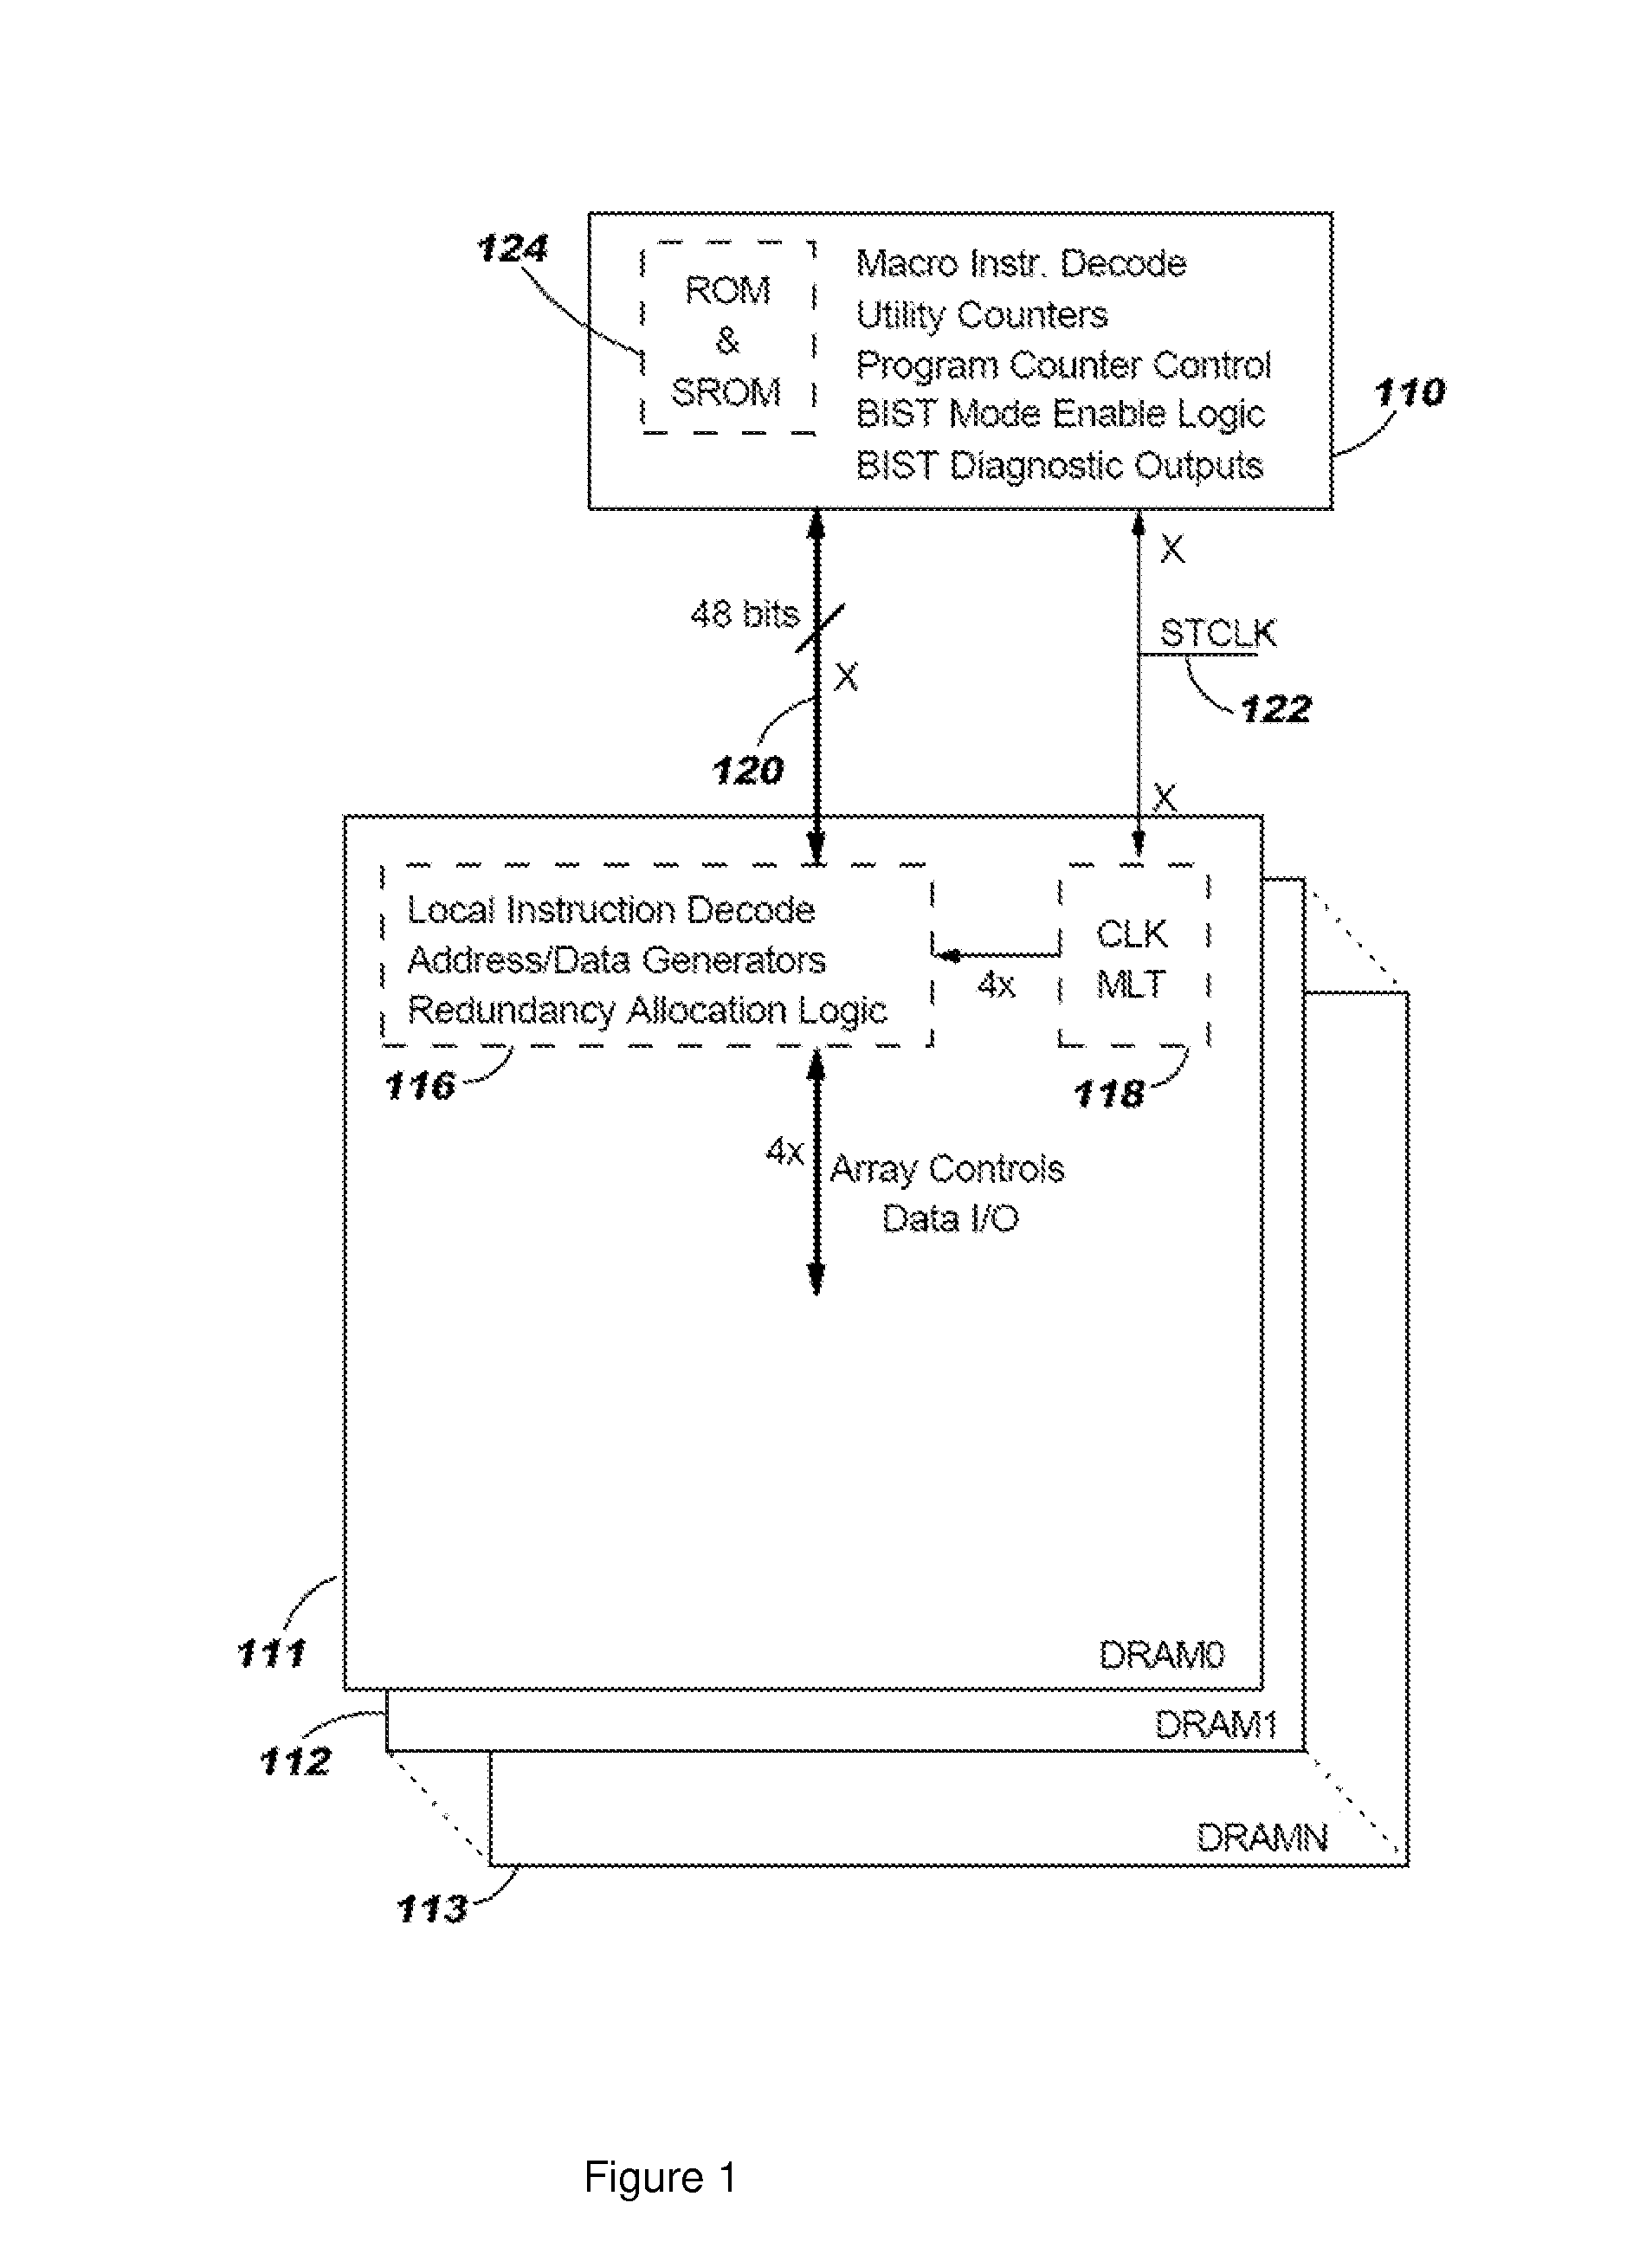 Hybrid built-in self test (BIST) architecture for embedded memory arrays and an associated method